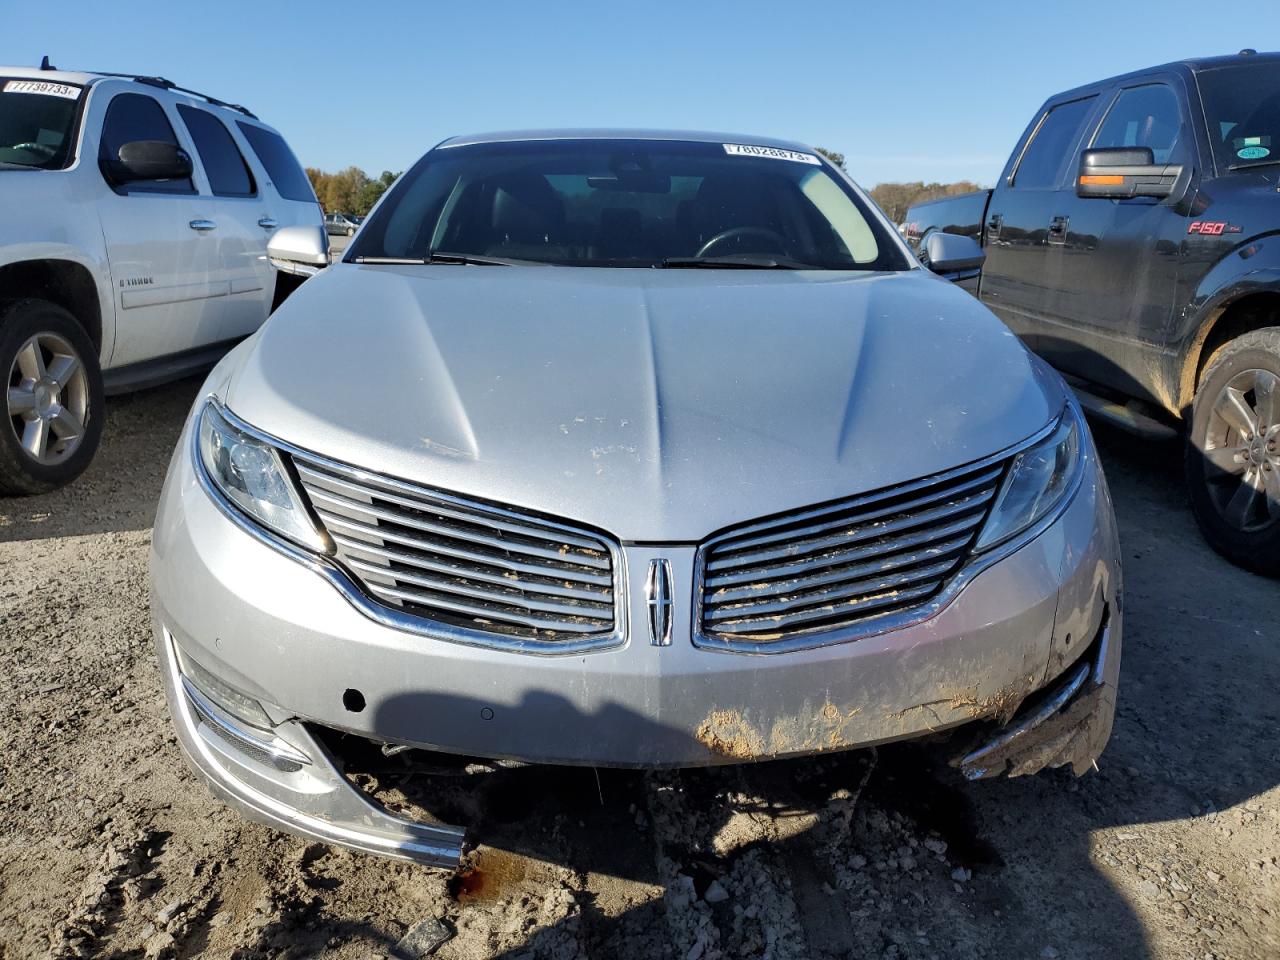 3LN6L2LUXDR812550  - LINCOLN MKZ  2013 IMG - 4